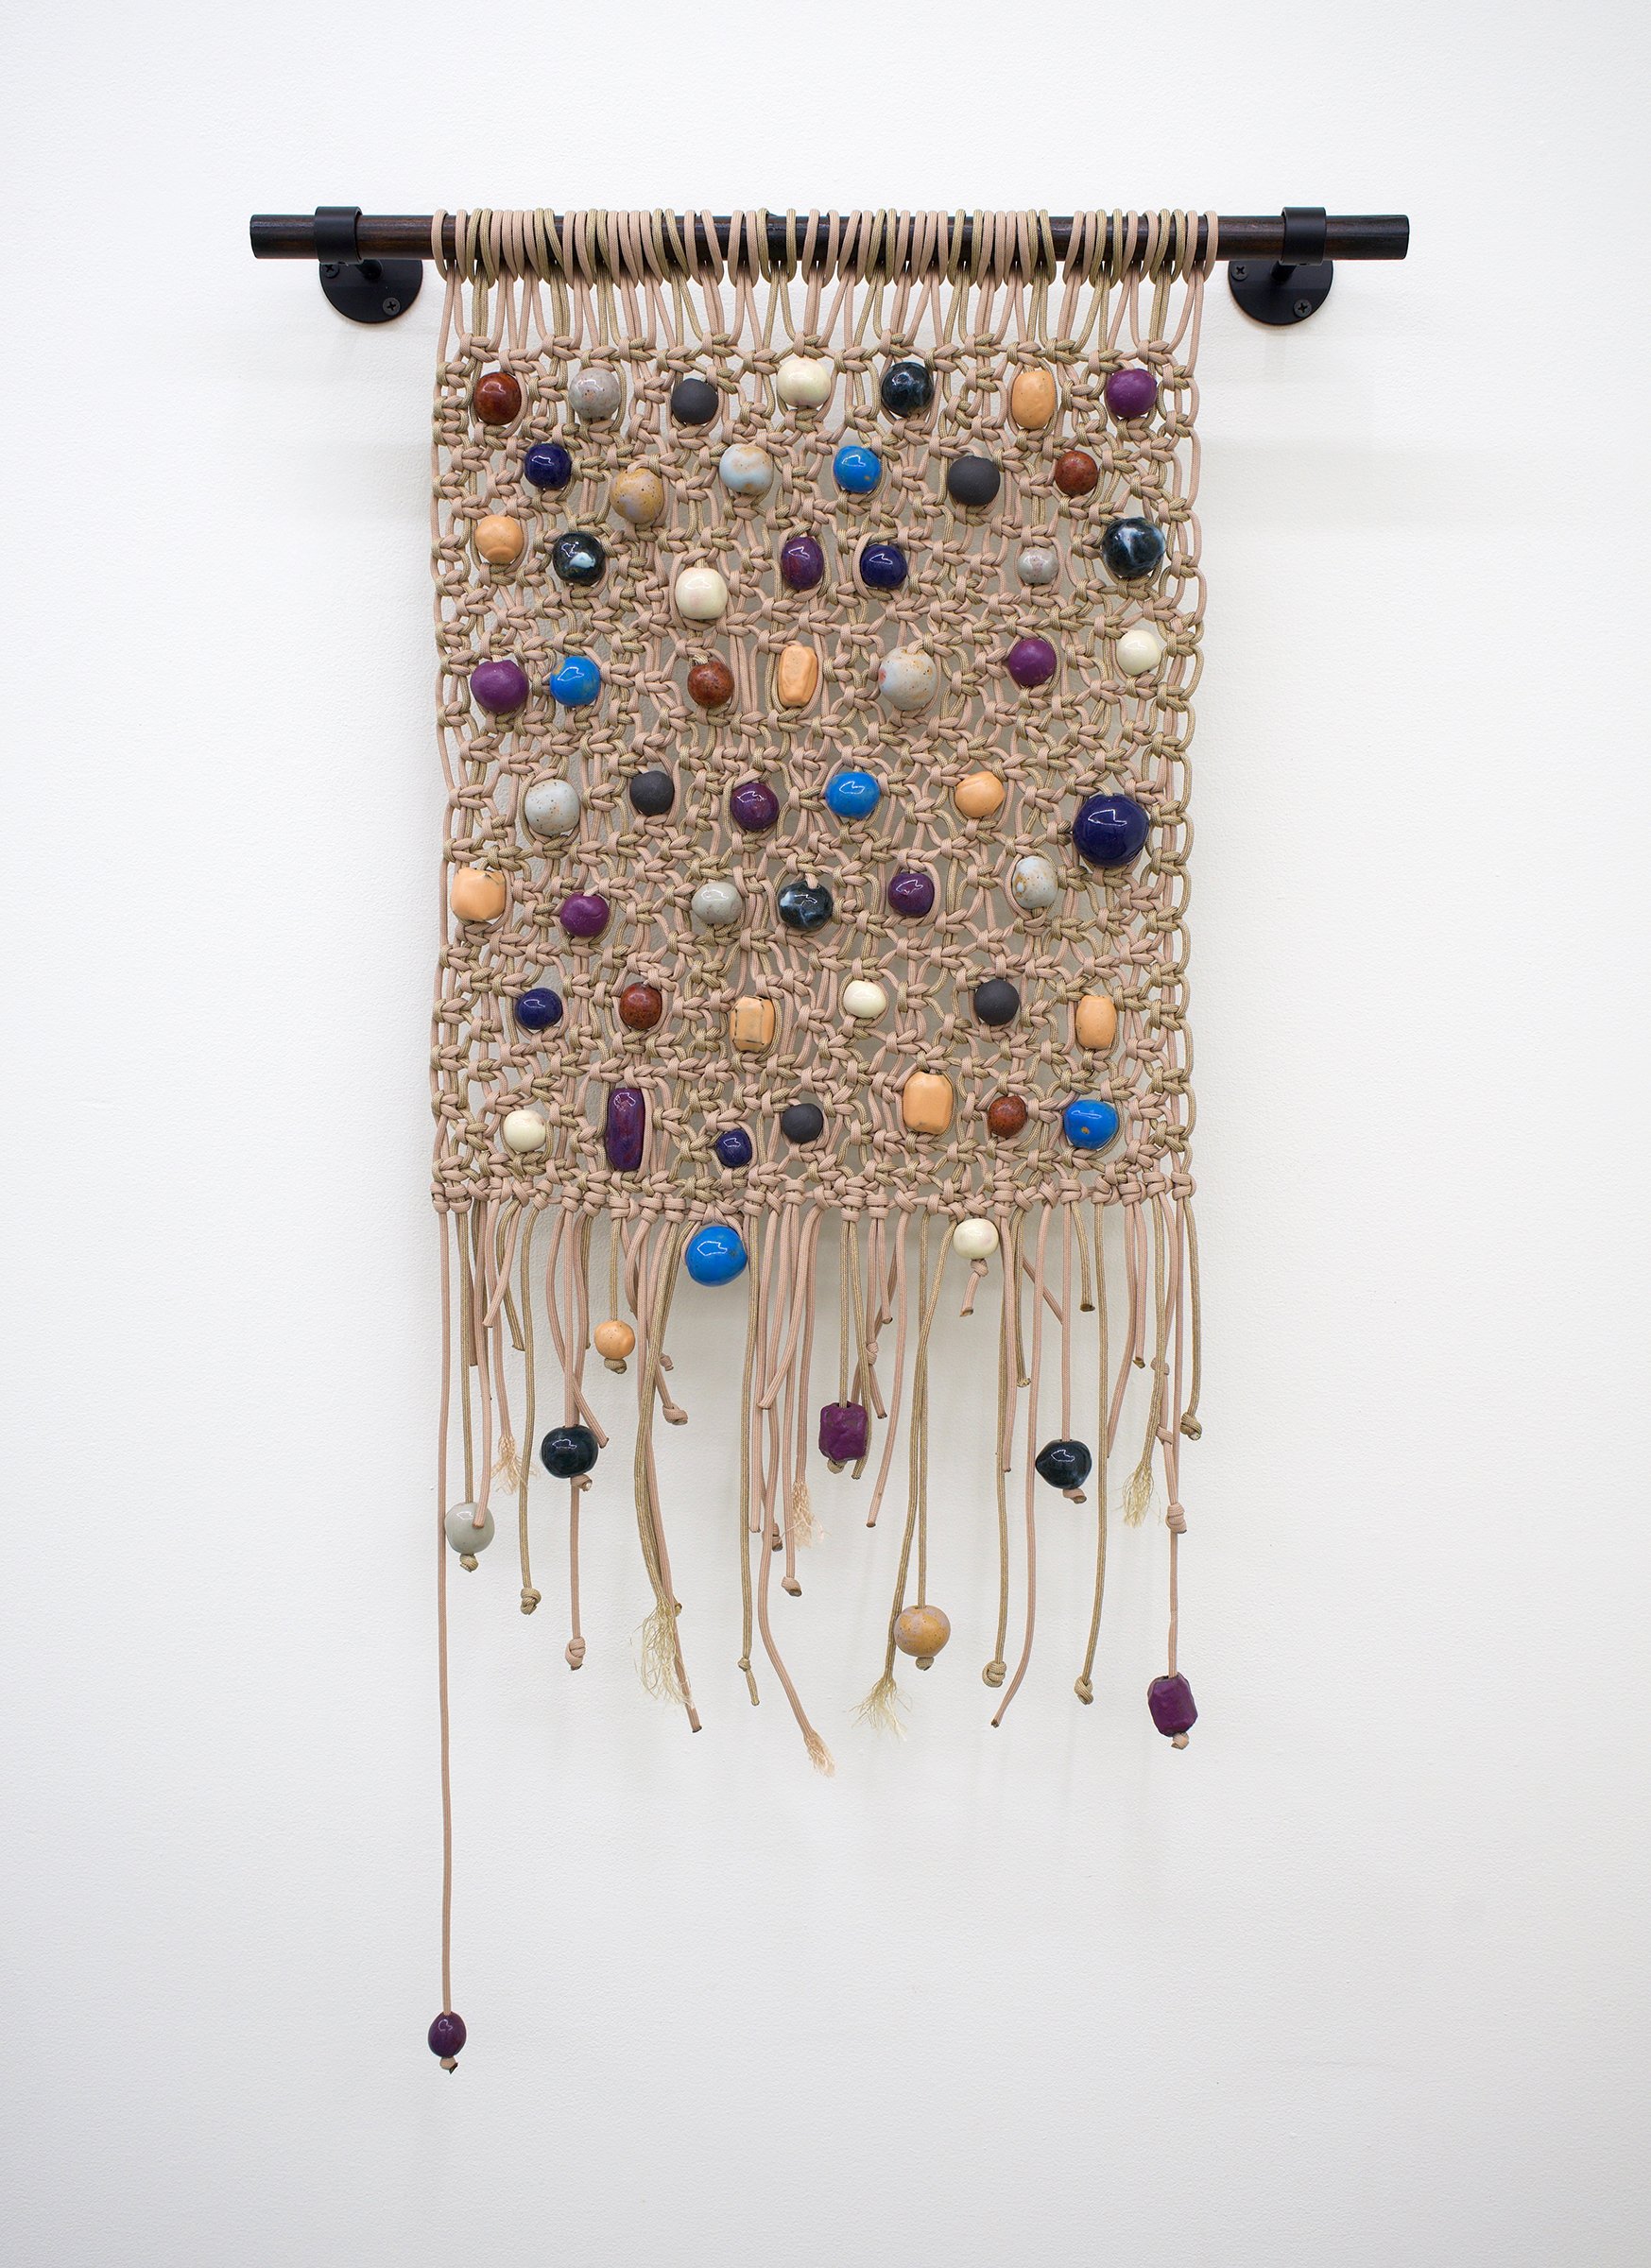   Beige , 2021 Paracord, glazed stoneware beads, charred and stained wood, metal mounts 35” x 20.5” 